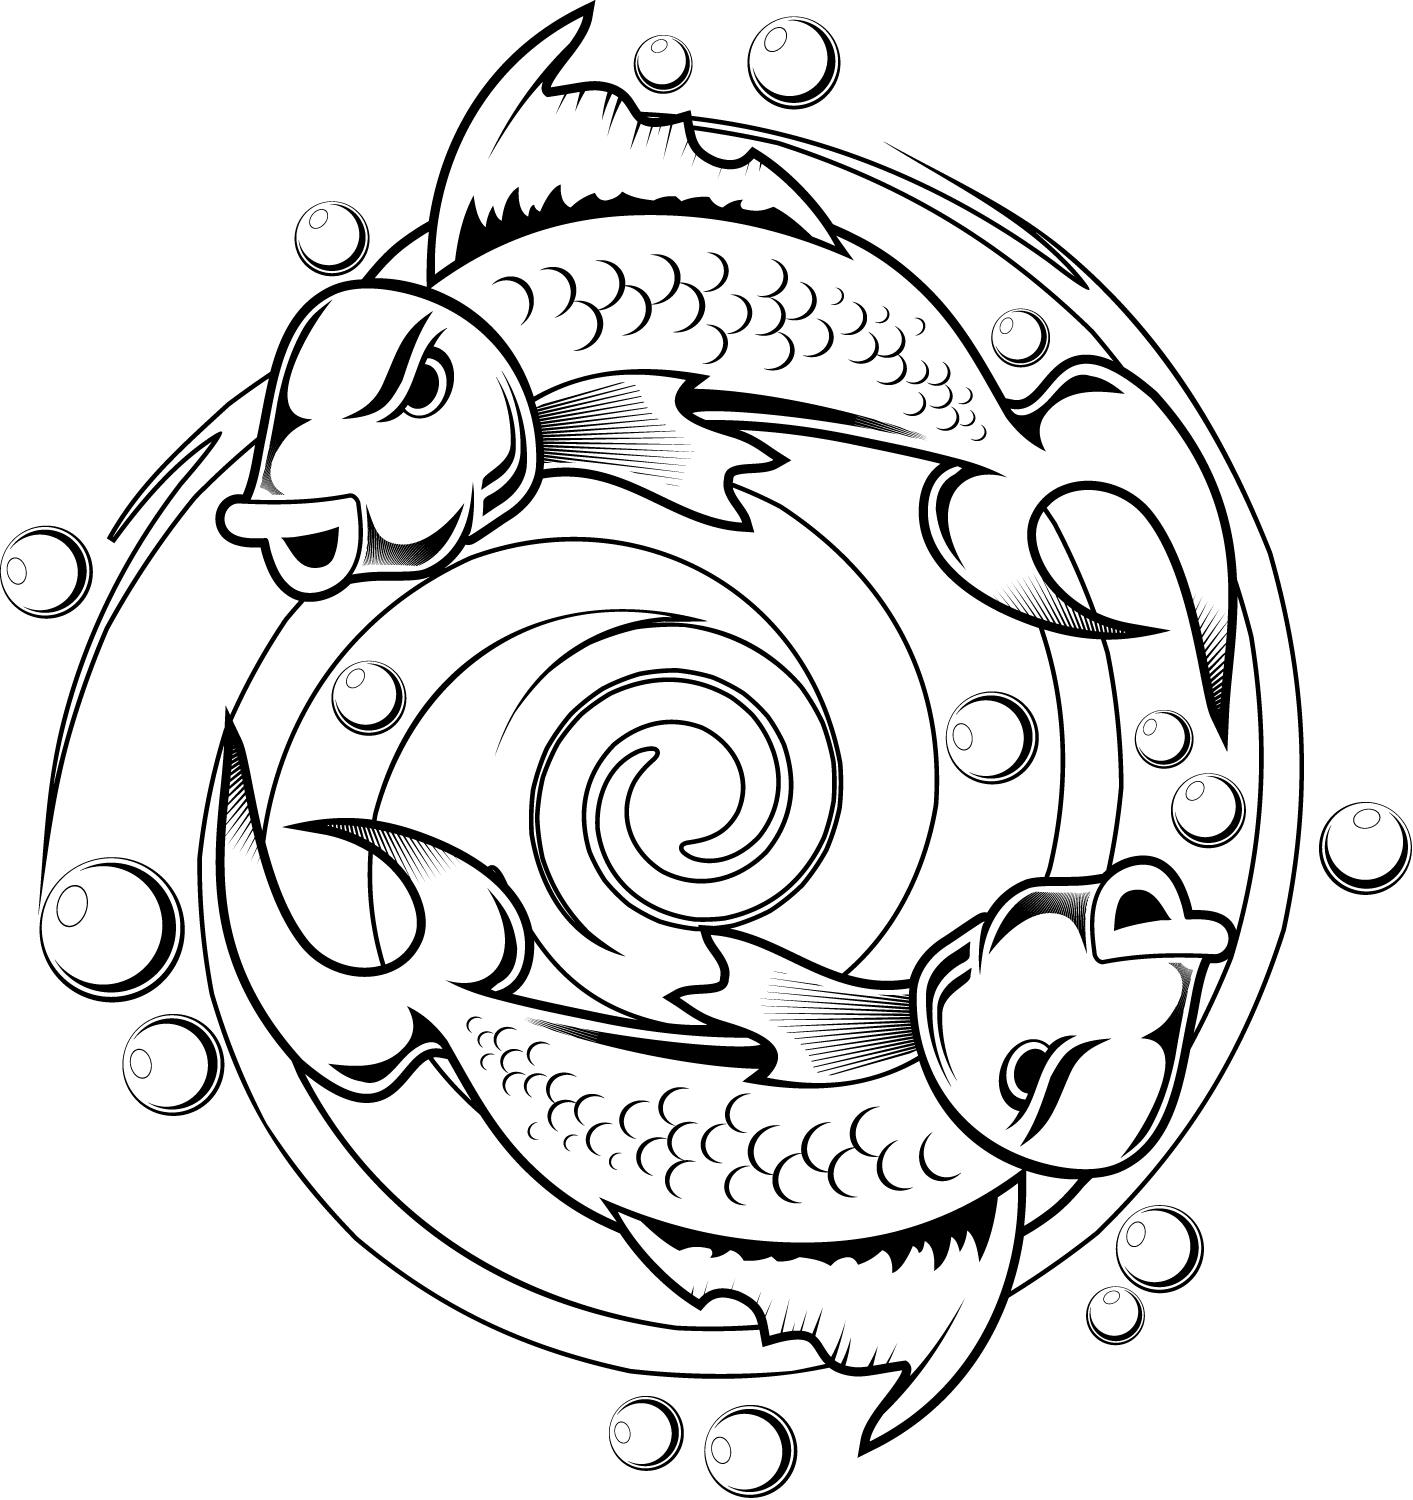 Kids Coloring Pages Of Koi Fish Tattoo Design Coloring Picture Of ...